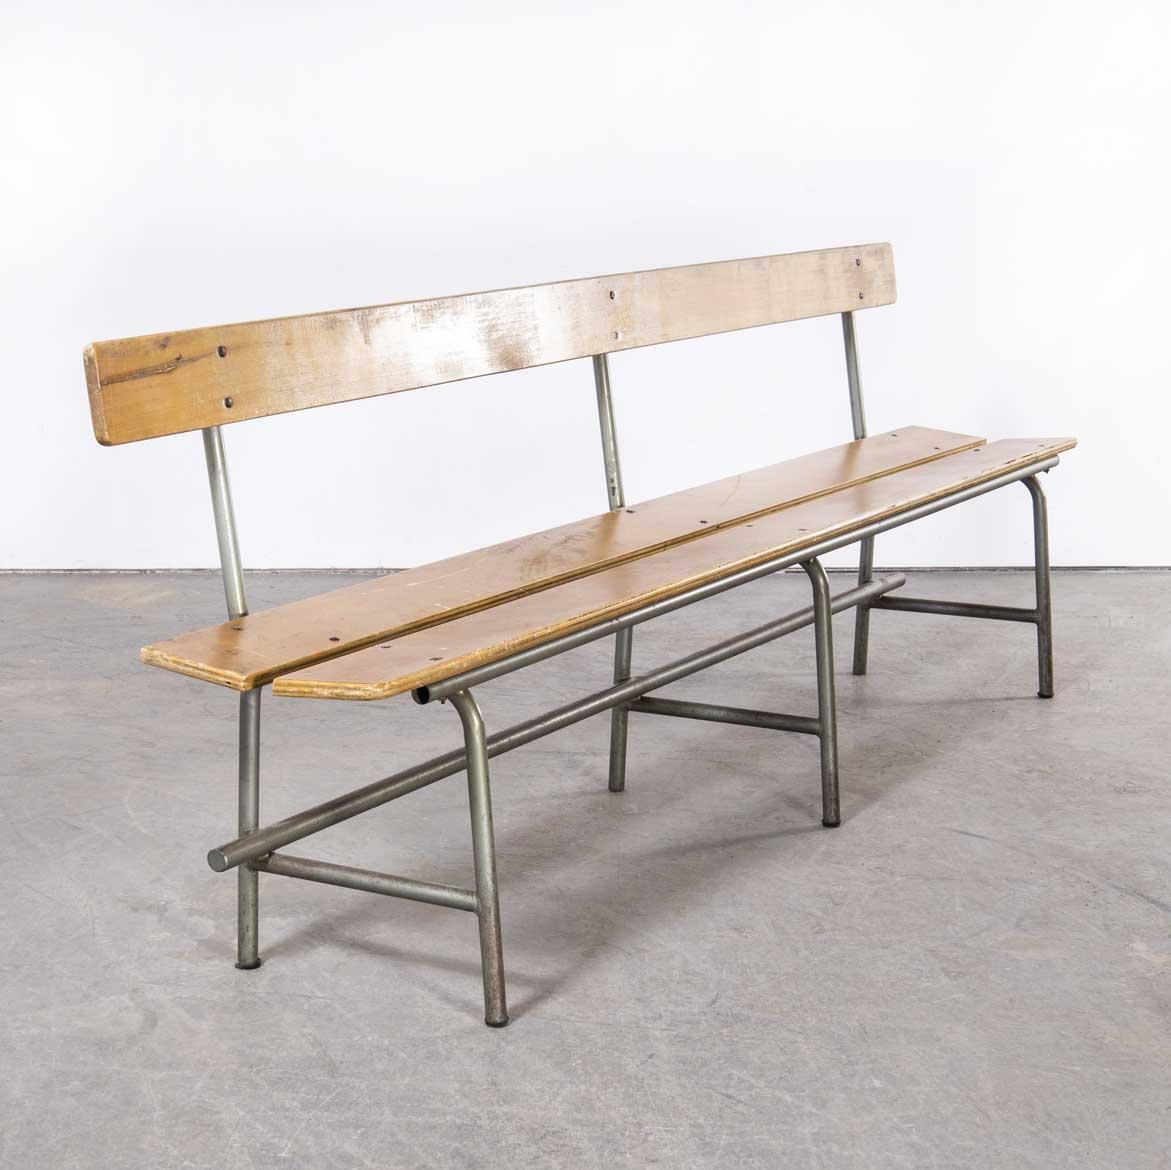 1960's Original French Mullca School Bench with Back For Sale 2